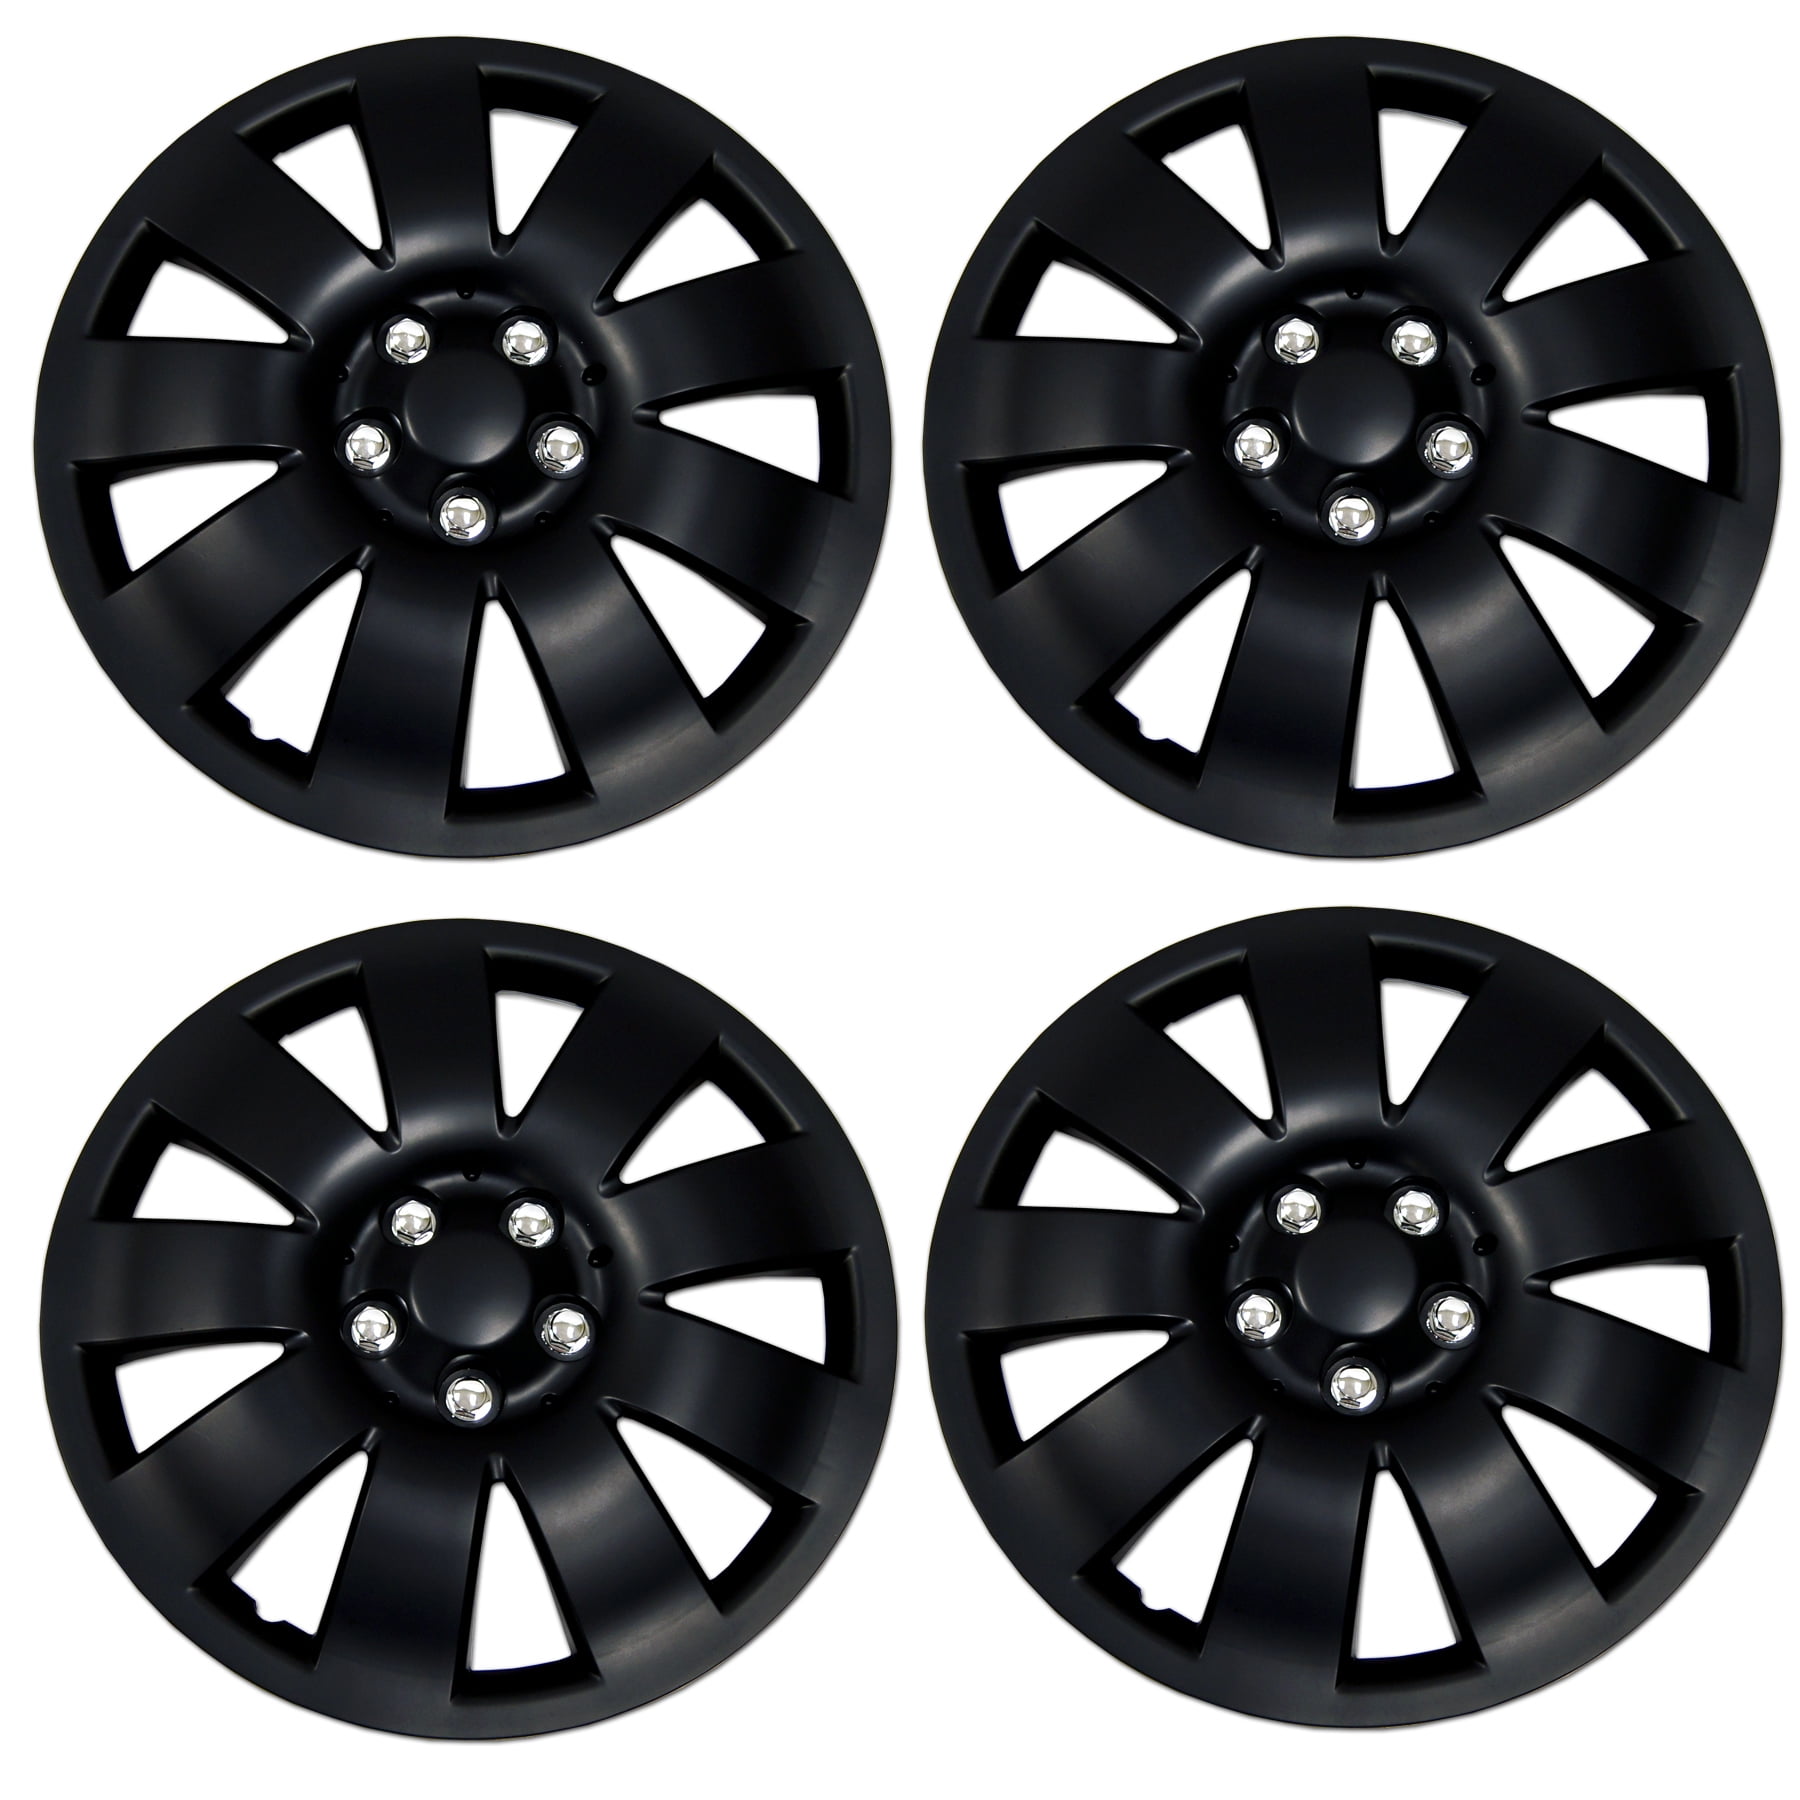 TuningPros WSC-027B15 Hubcaps Wheel Skin Cover 15-Inches Matte Black Set of 4 